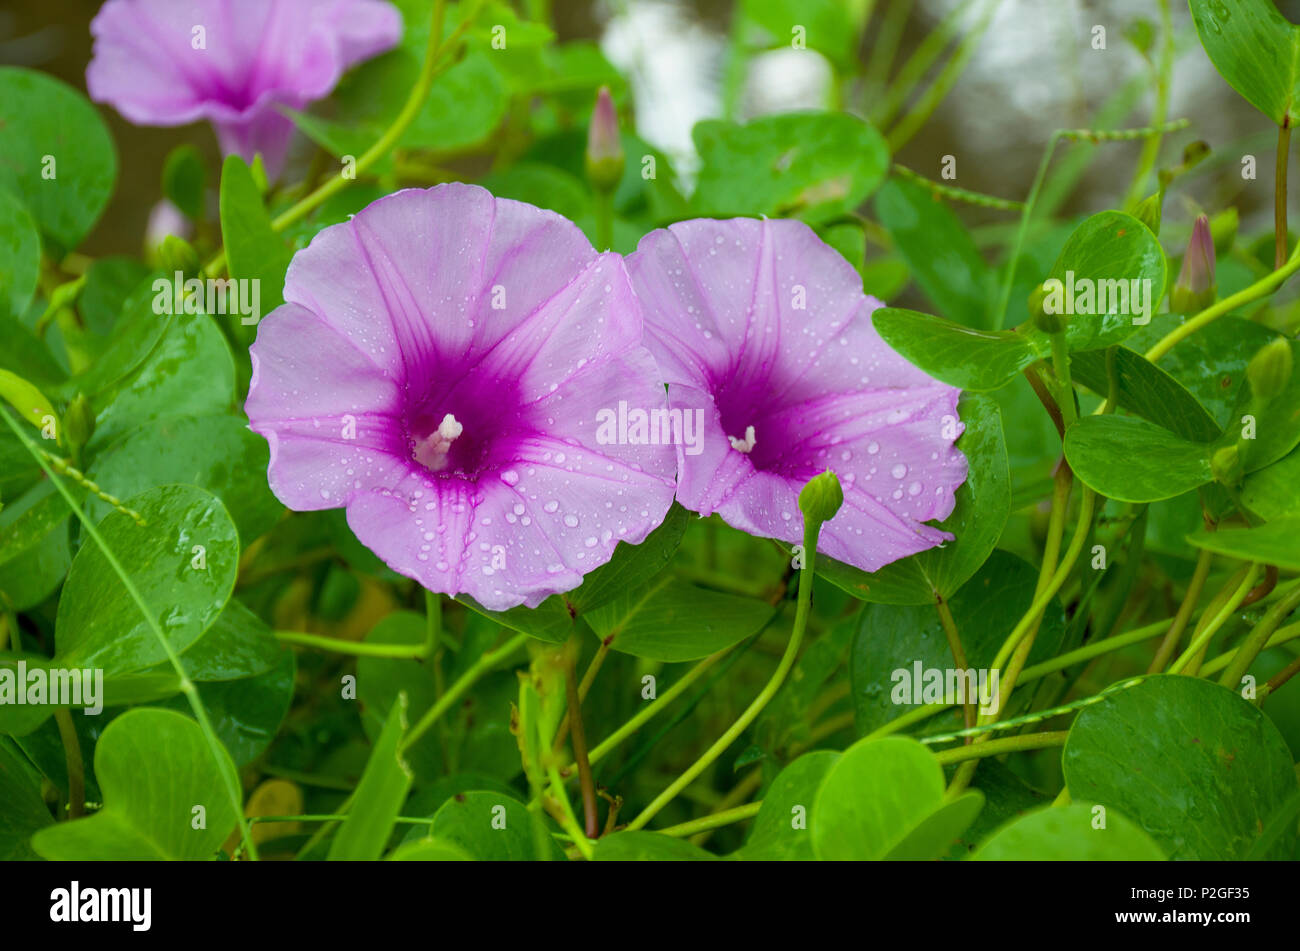 The violet flower tropical grows on sand with rain drops Stock Photo